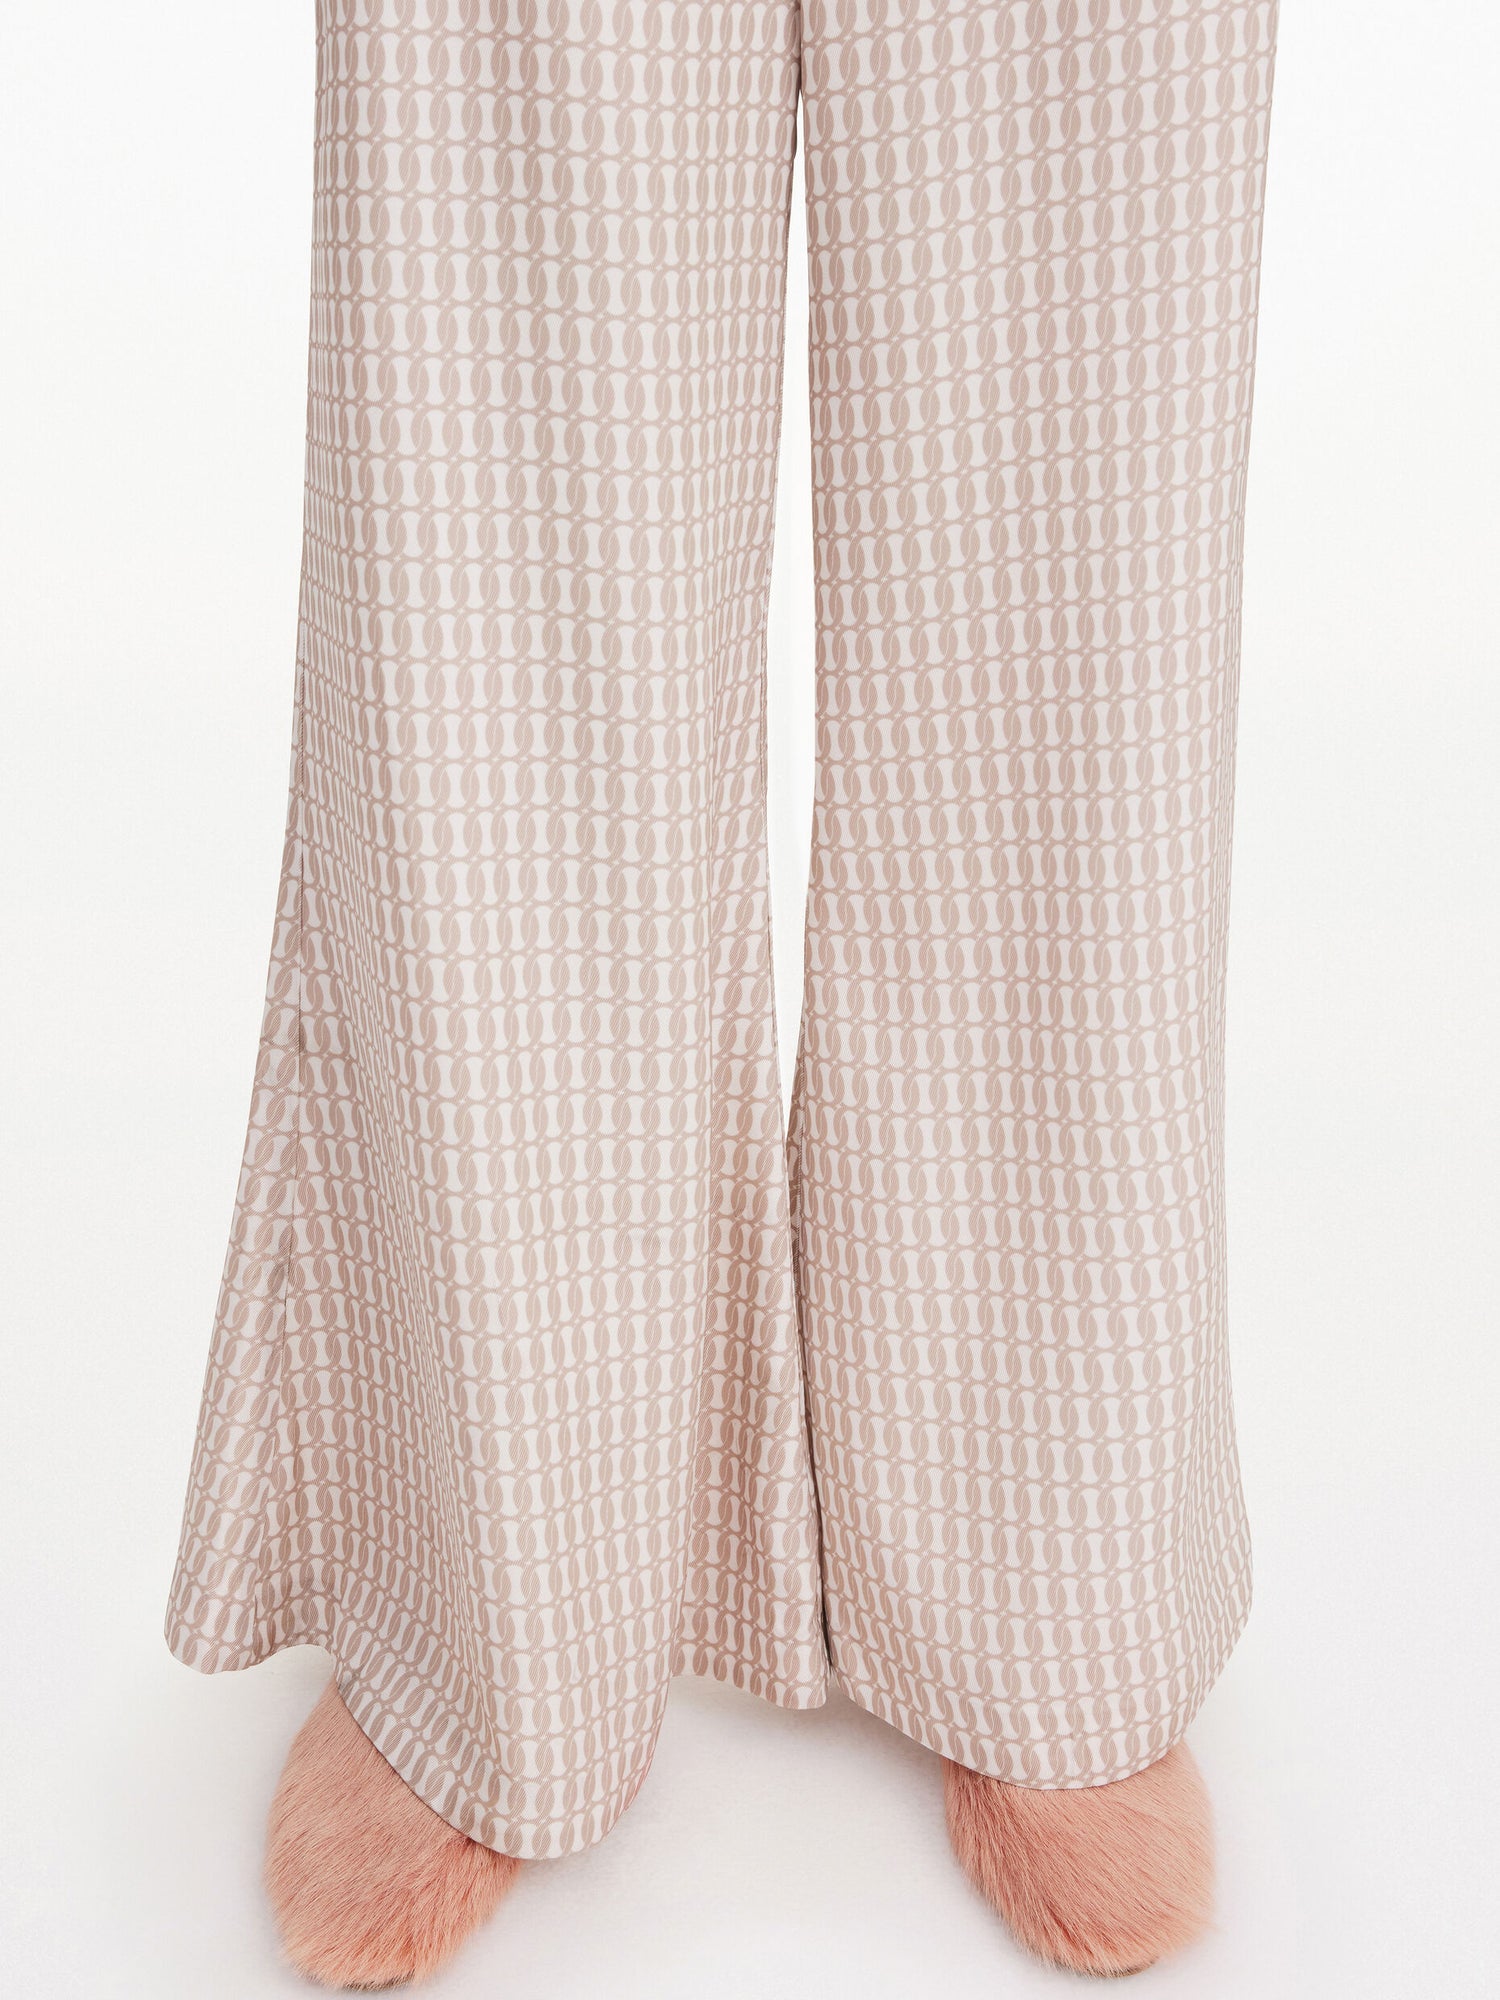 LUCEE trousers, off white monogram